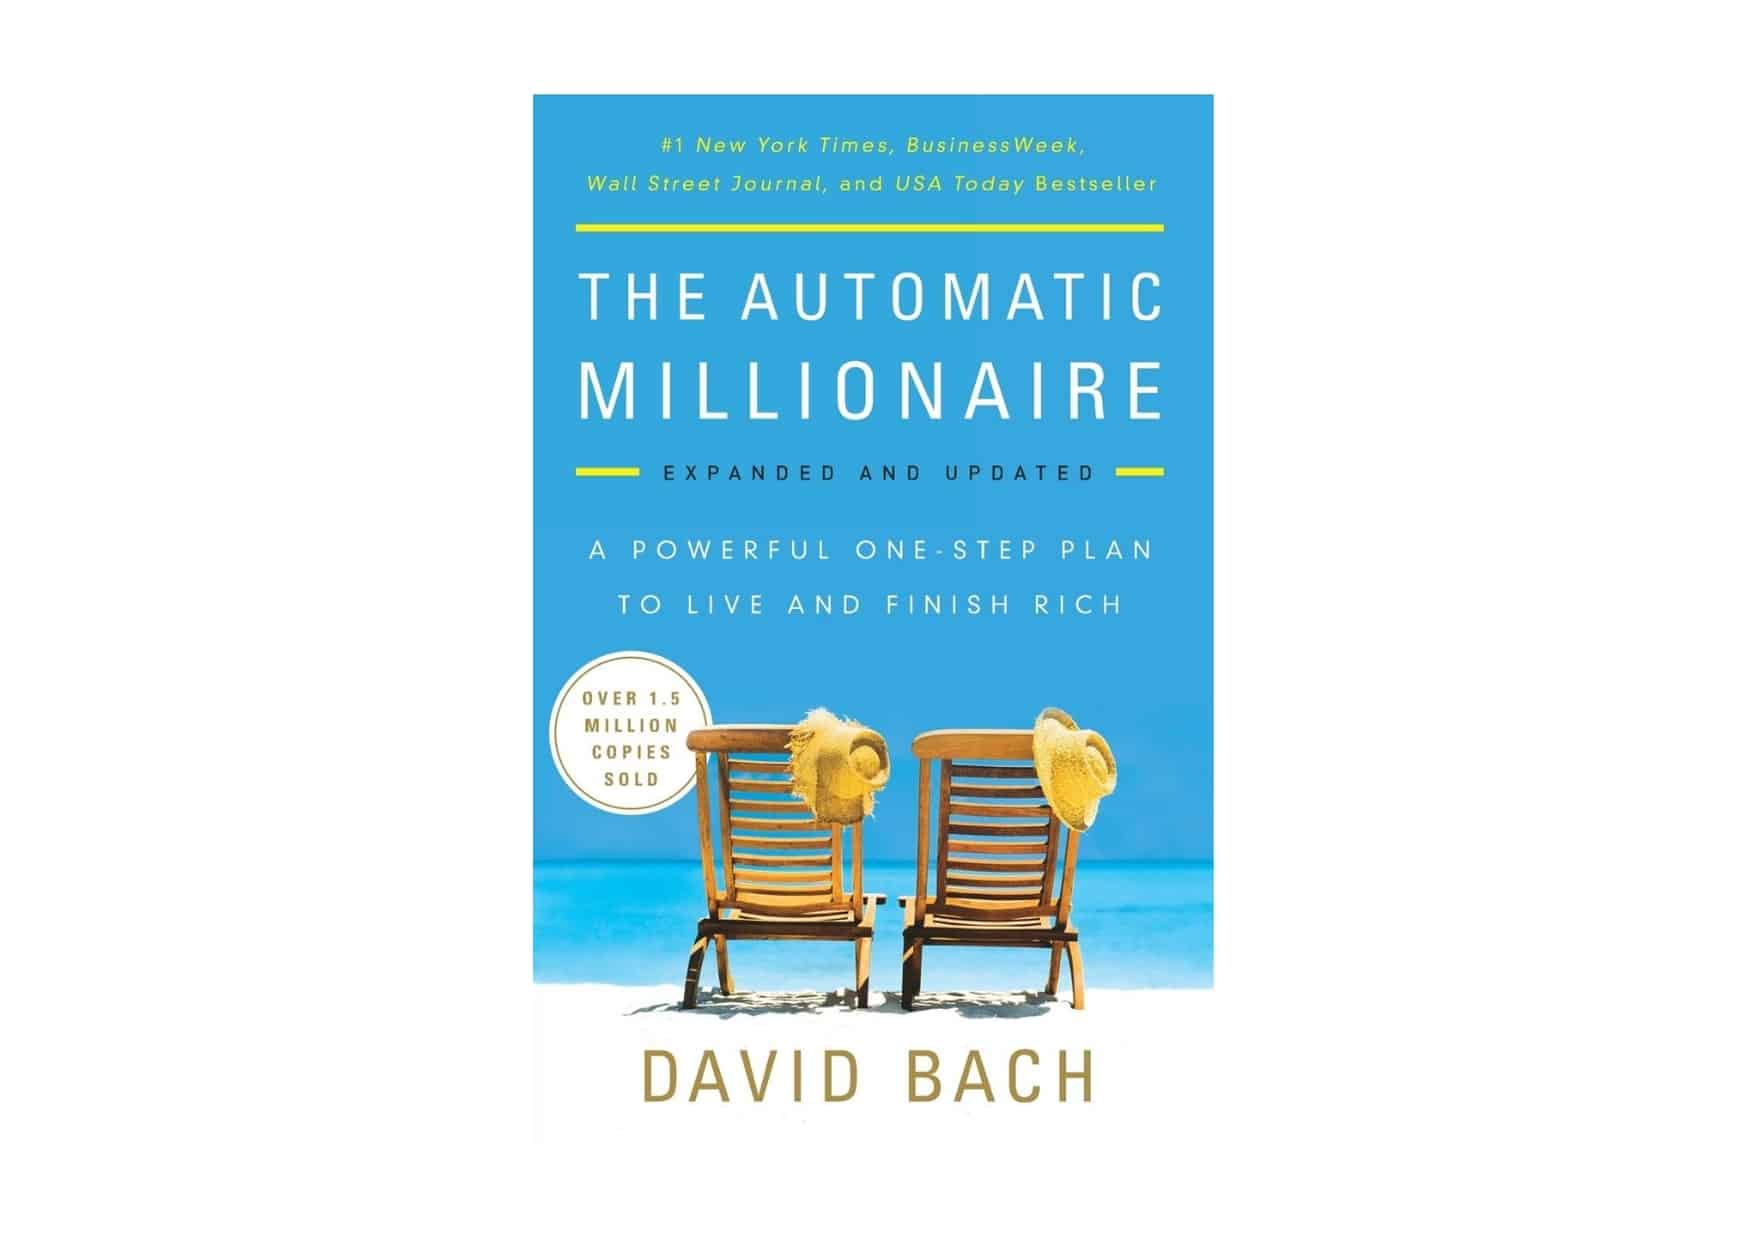 david bach author of the automatic millionaire torrent